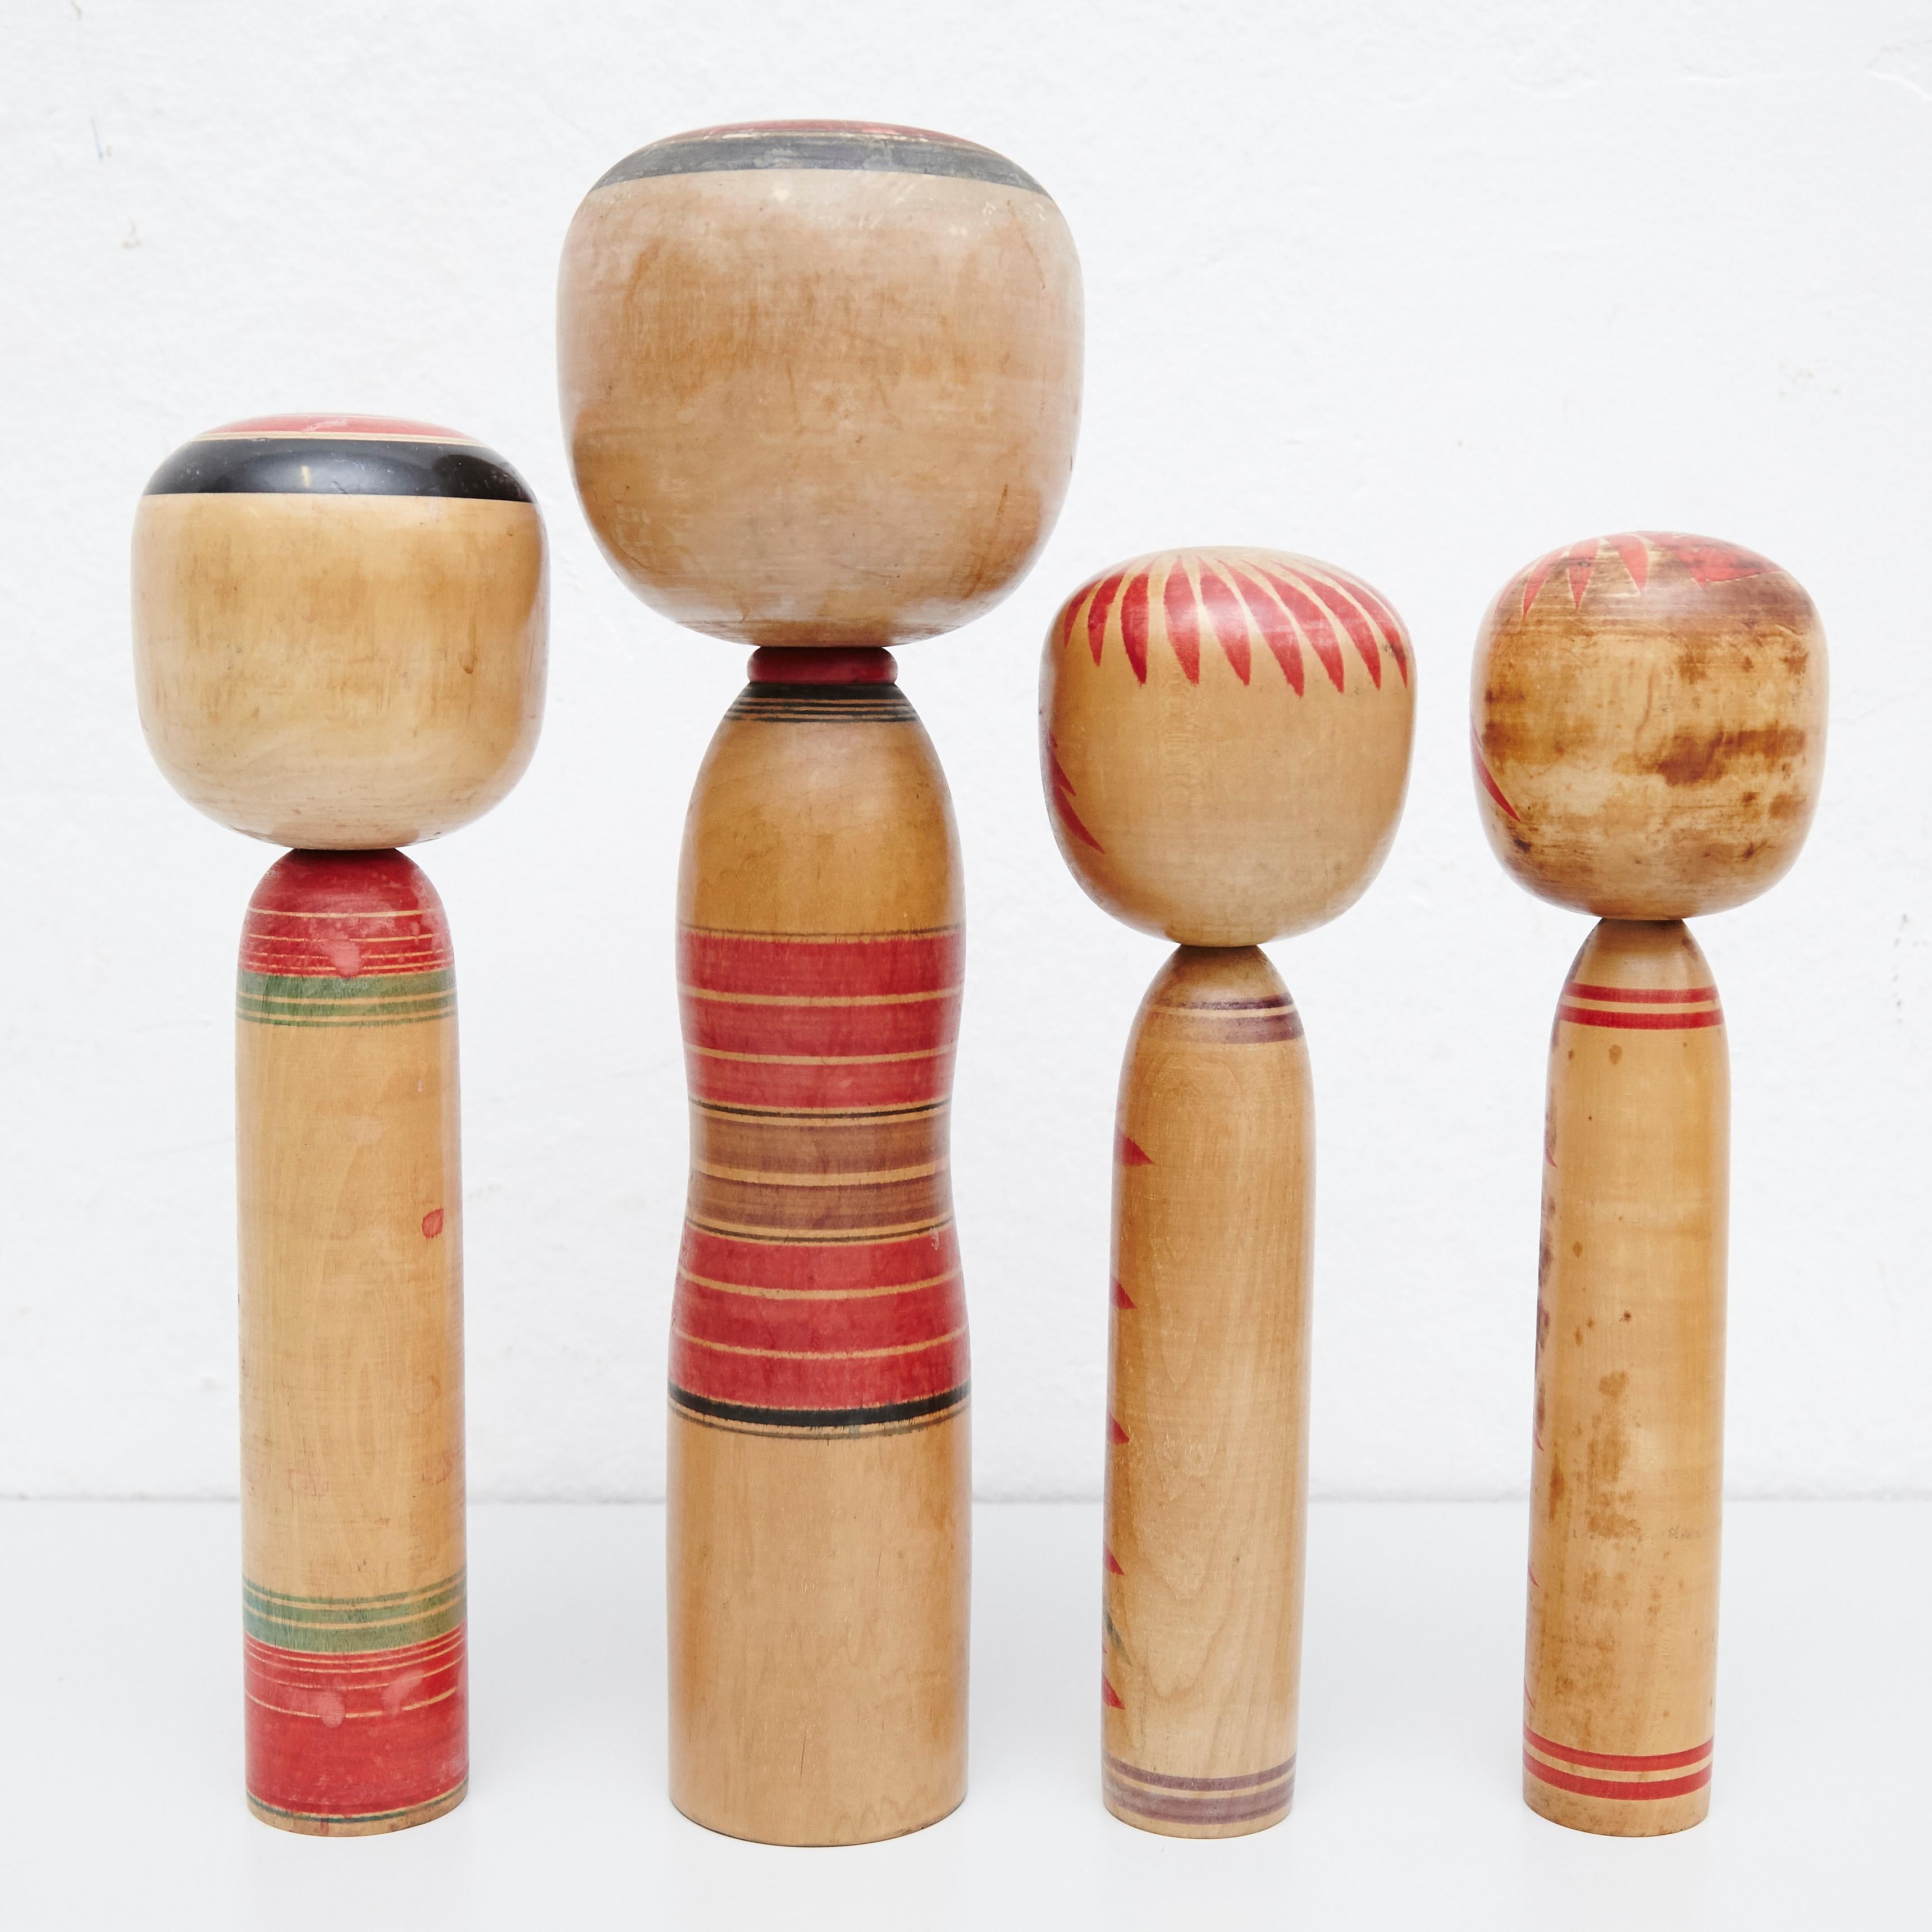 Japanese dolls called Kokeshi of the early 20th century.
Provenance from the northern Japan.
Set of 4.

Measures: 

33 x 9 cm
39,5 x 12,5 cm
31 x 8,5 cm
30,5 x 9 cm

Handmade by Japanese artisants from wood. Have a simple trunk as a body